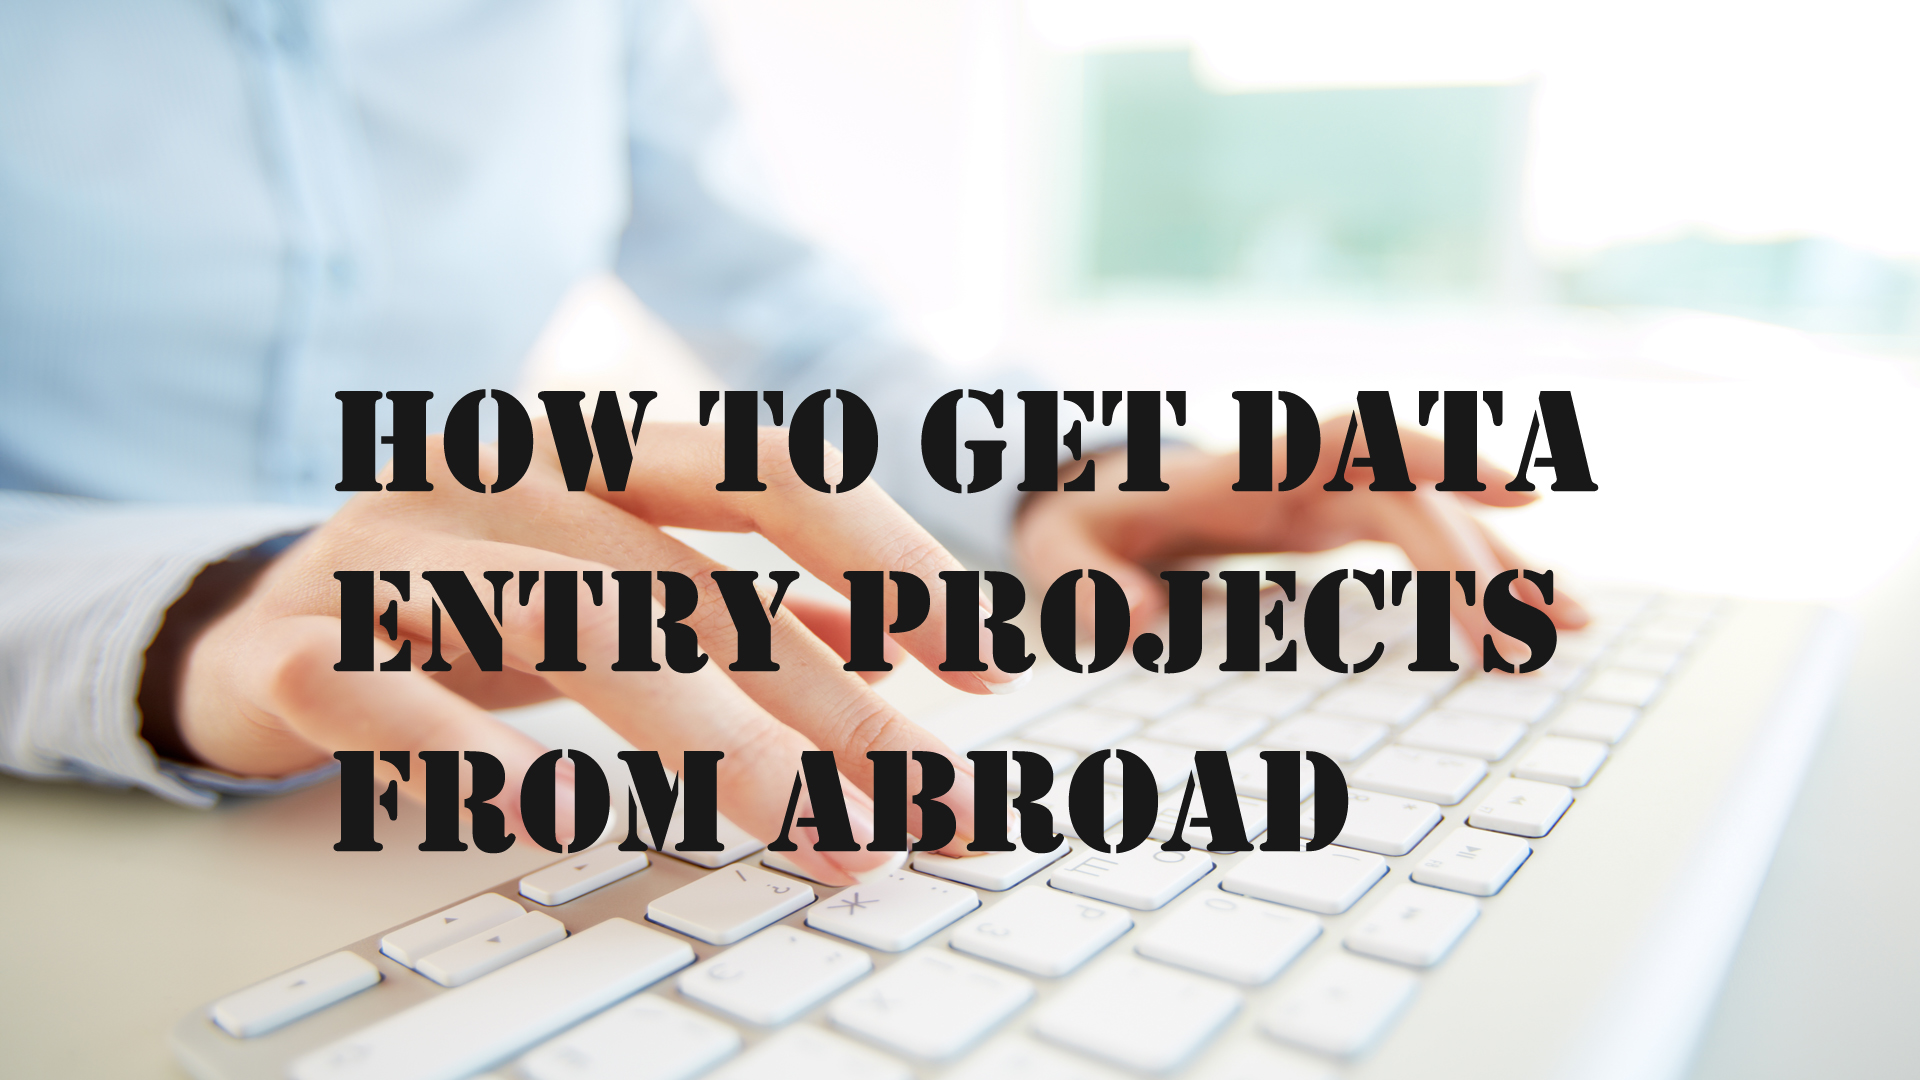 How to Get Data Entry Projects From Abroad – Article Bowl – Bloggers Unite India